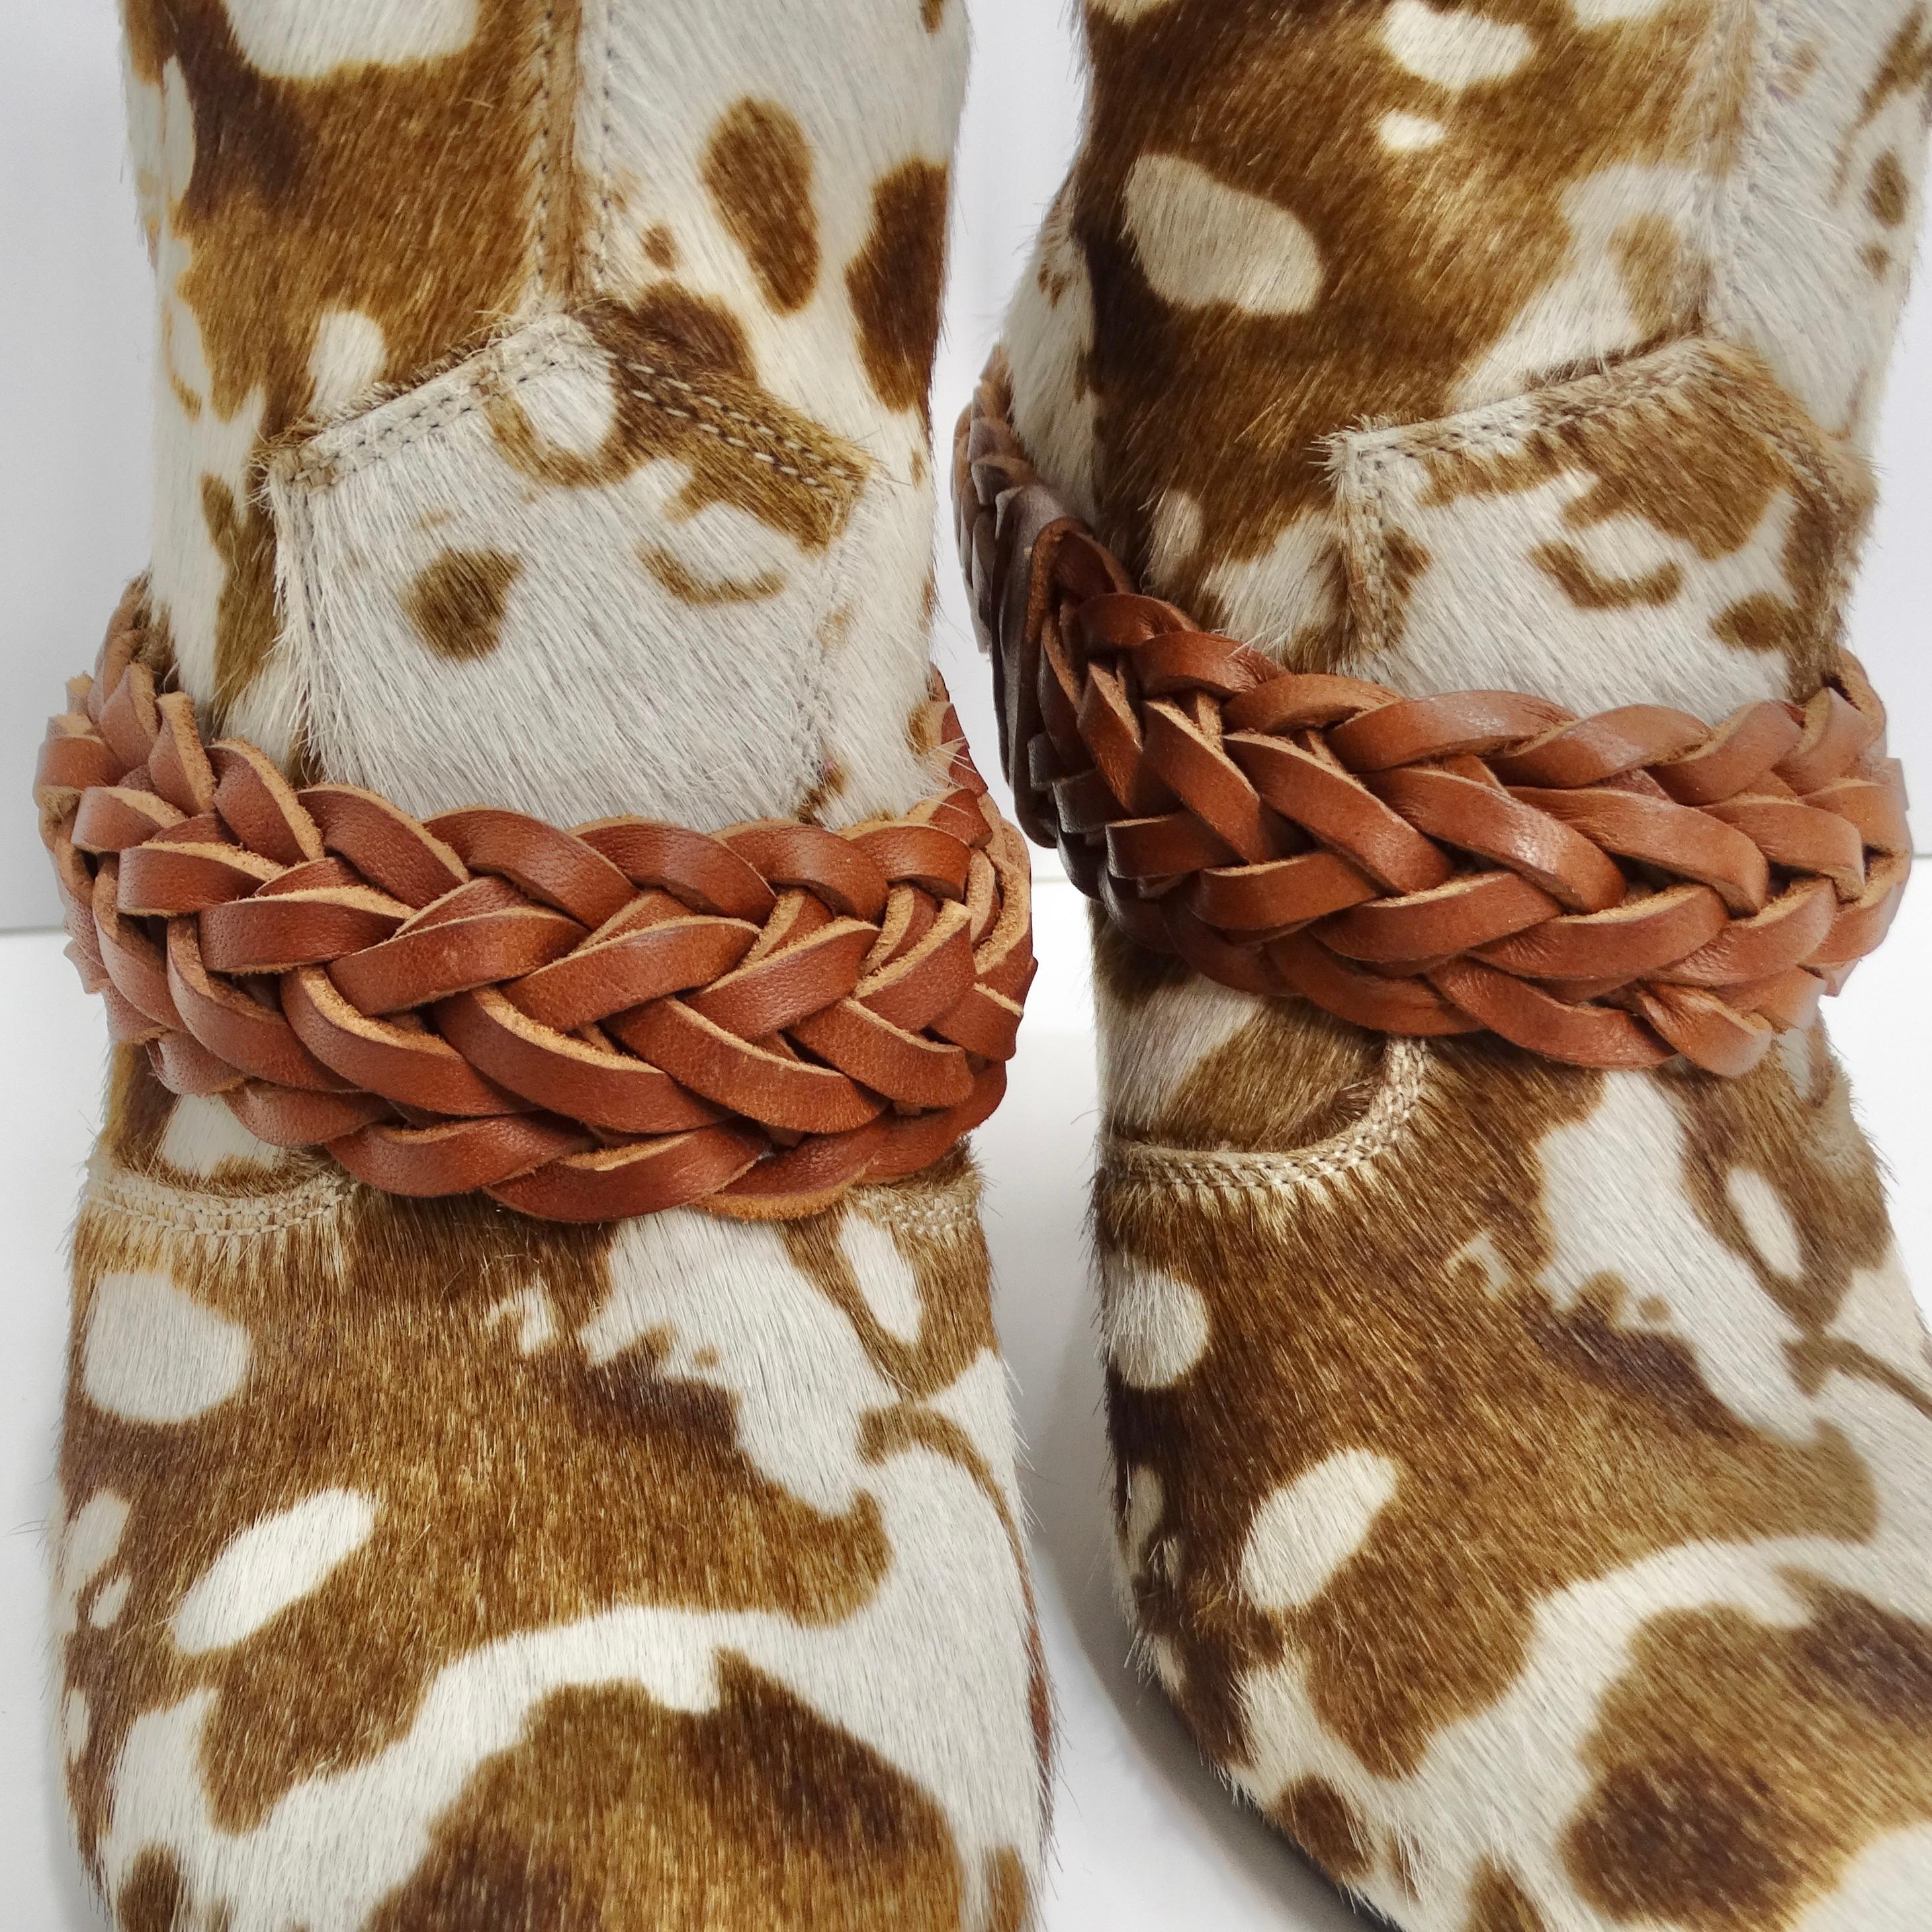 Golden Goose Cow Print Calf Hair Ankle Boots In Excellent Condition For Sale In Scottsdale, AZ